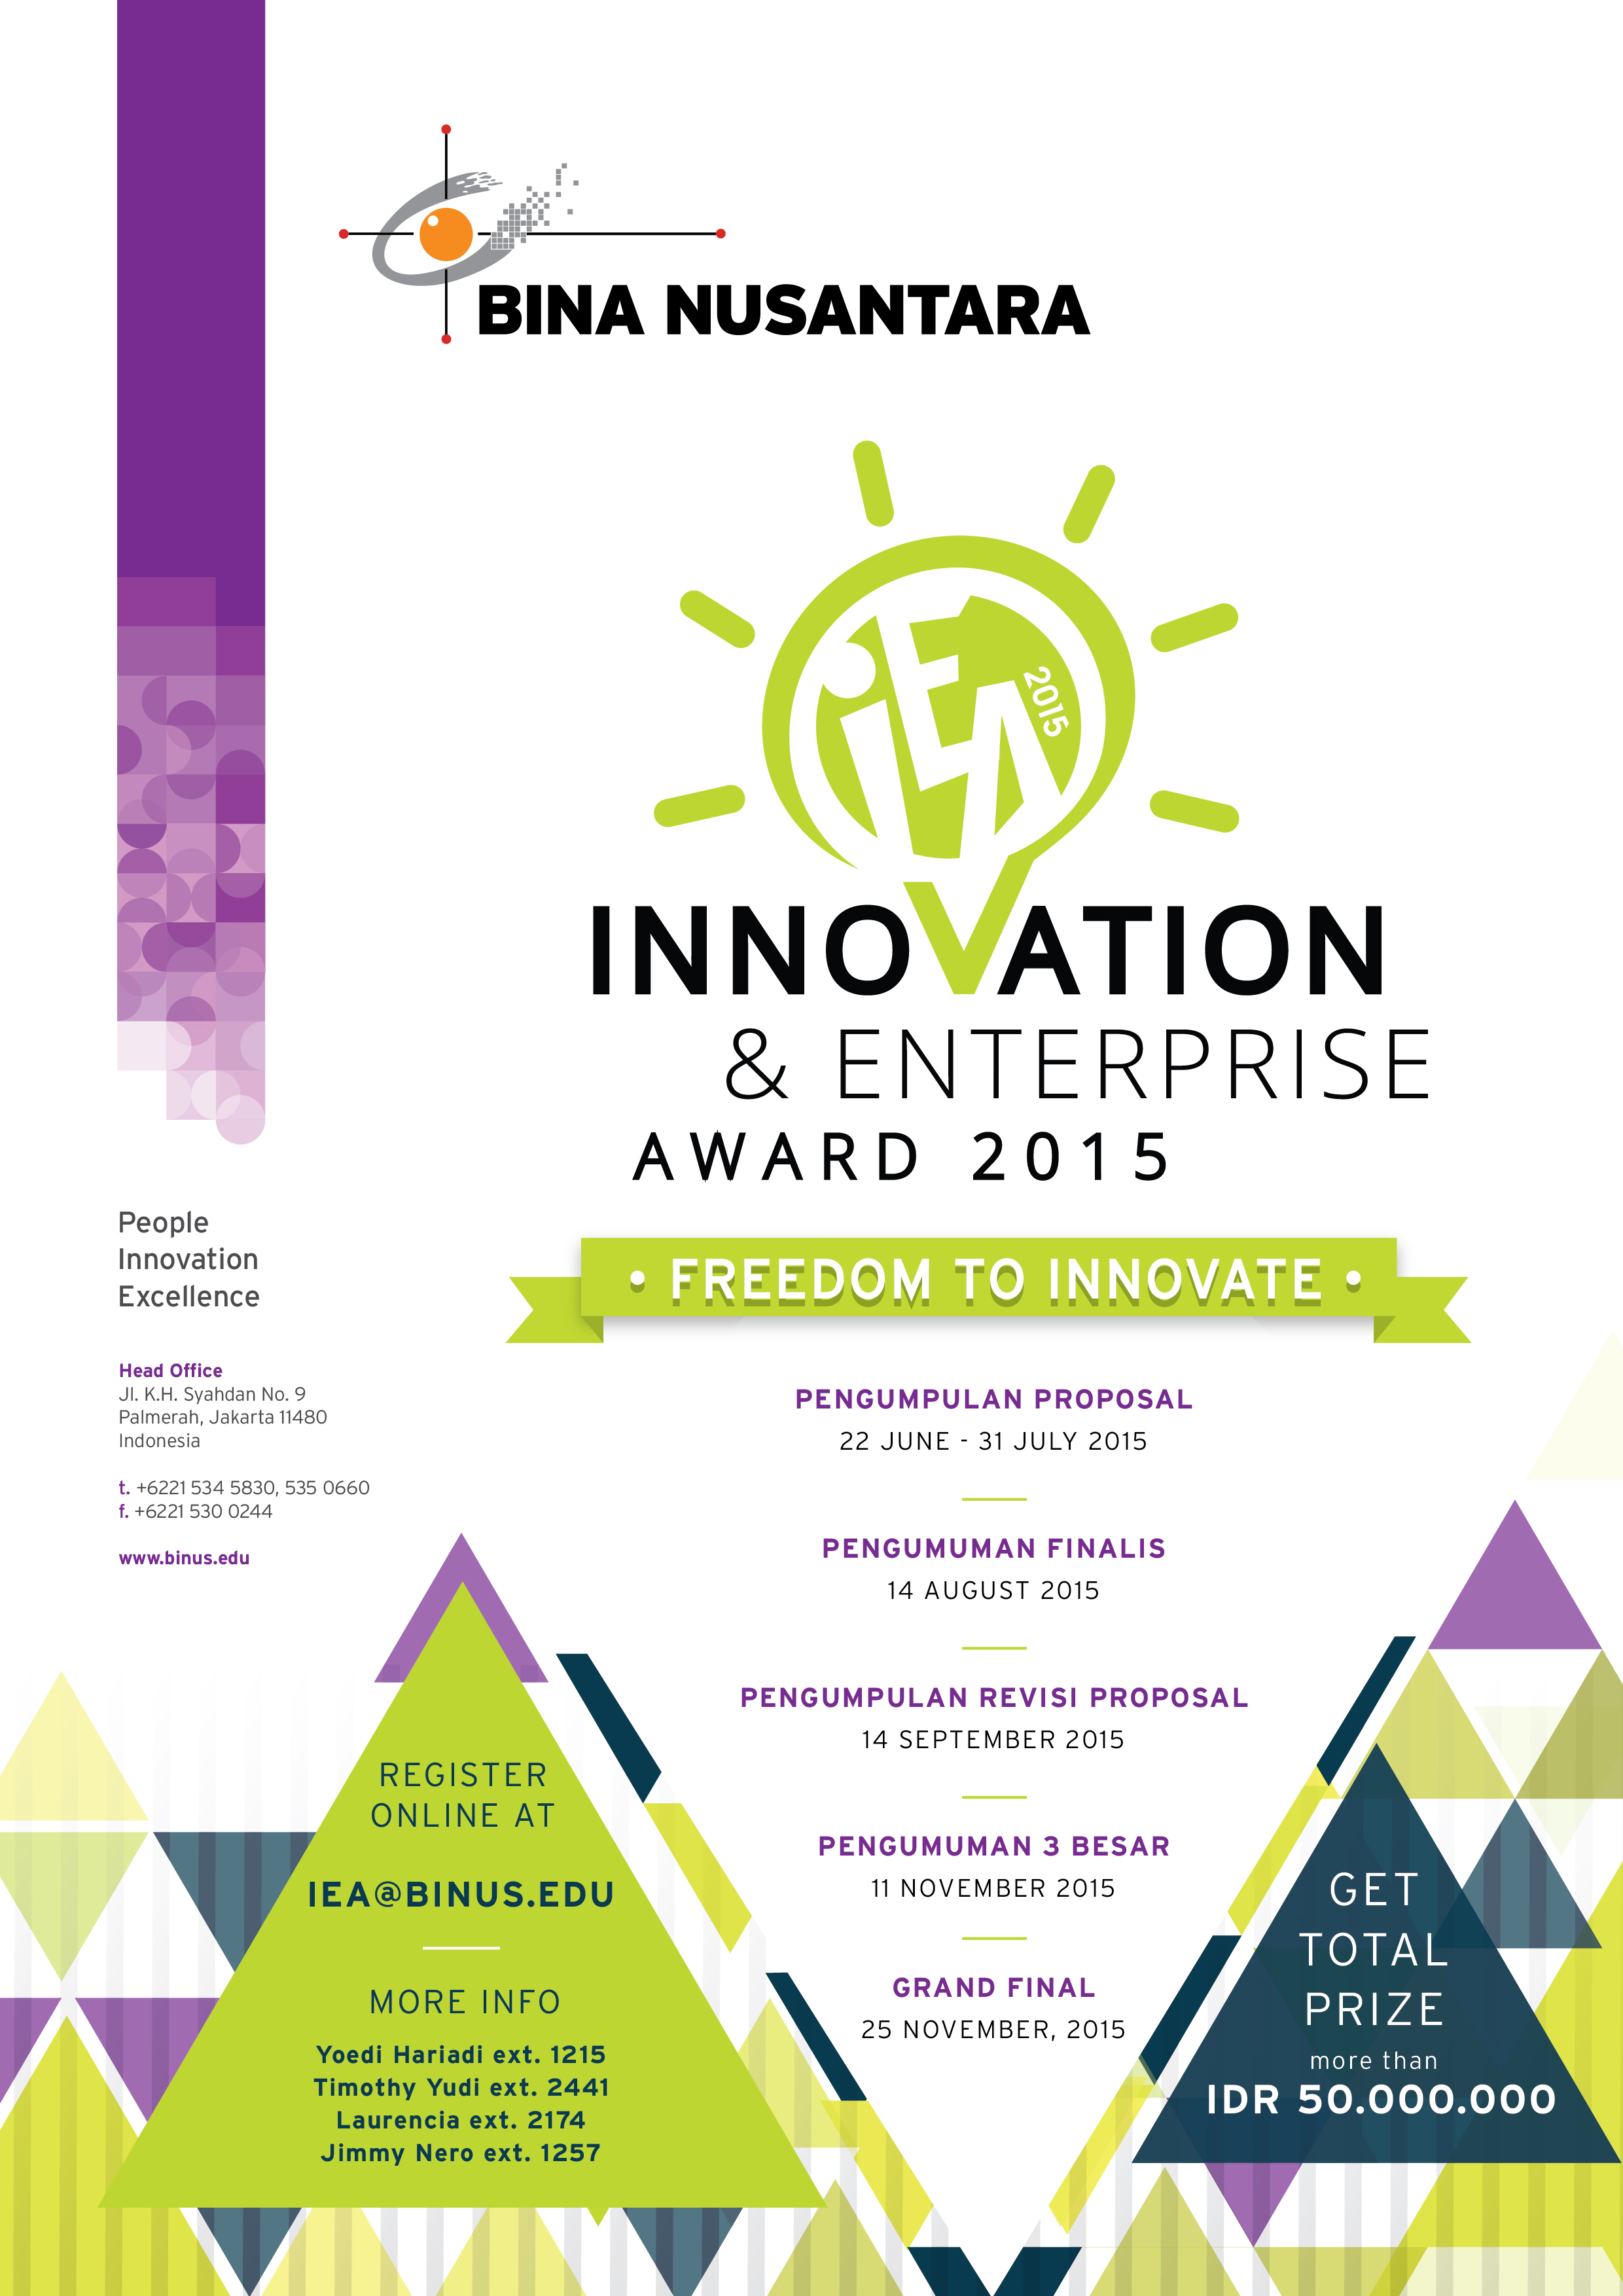 Innovation and Enterprise Award 2015 : Freedom to Innovate